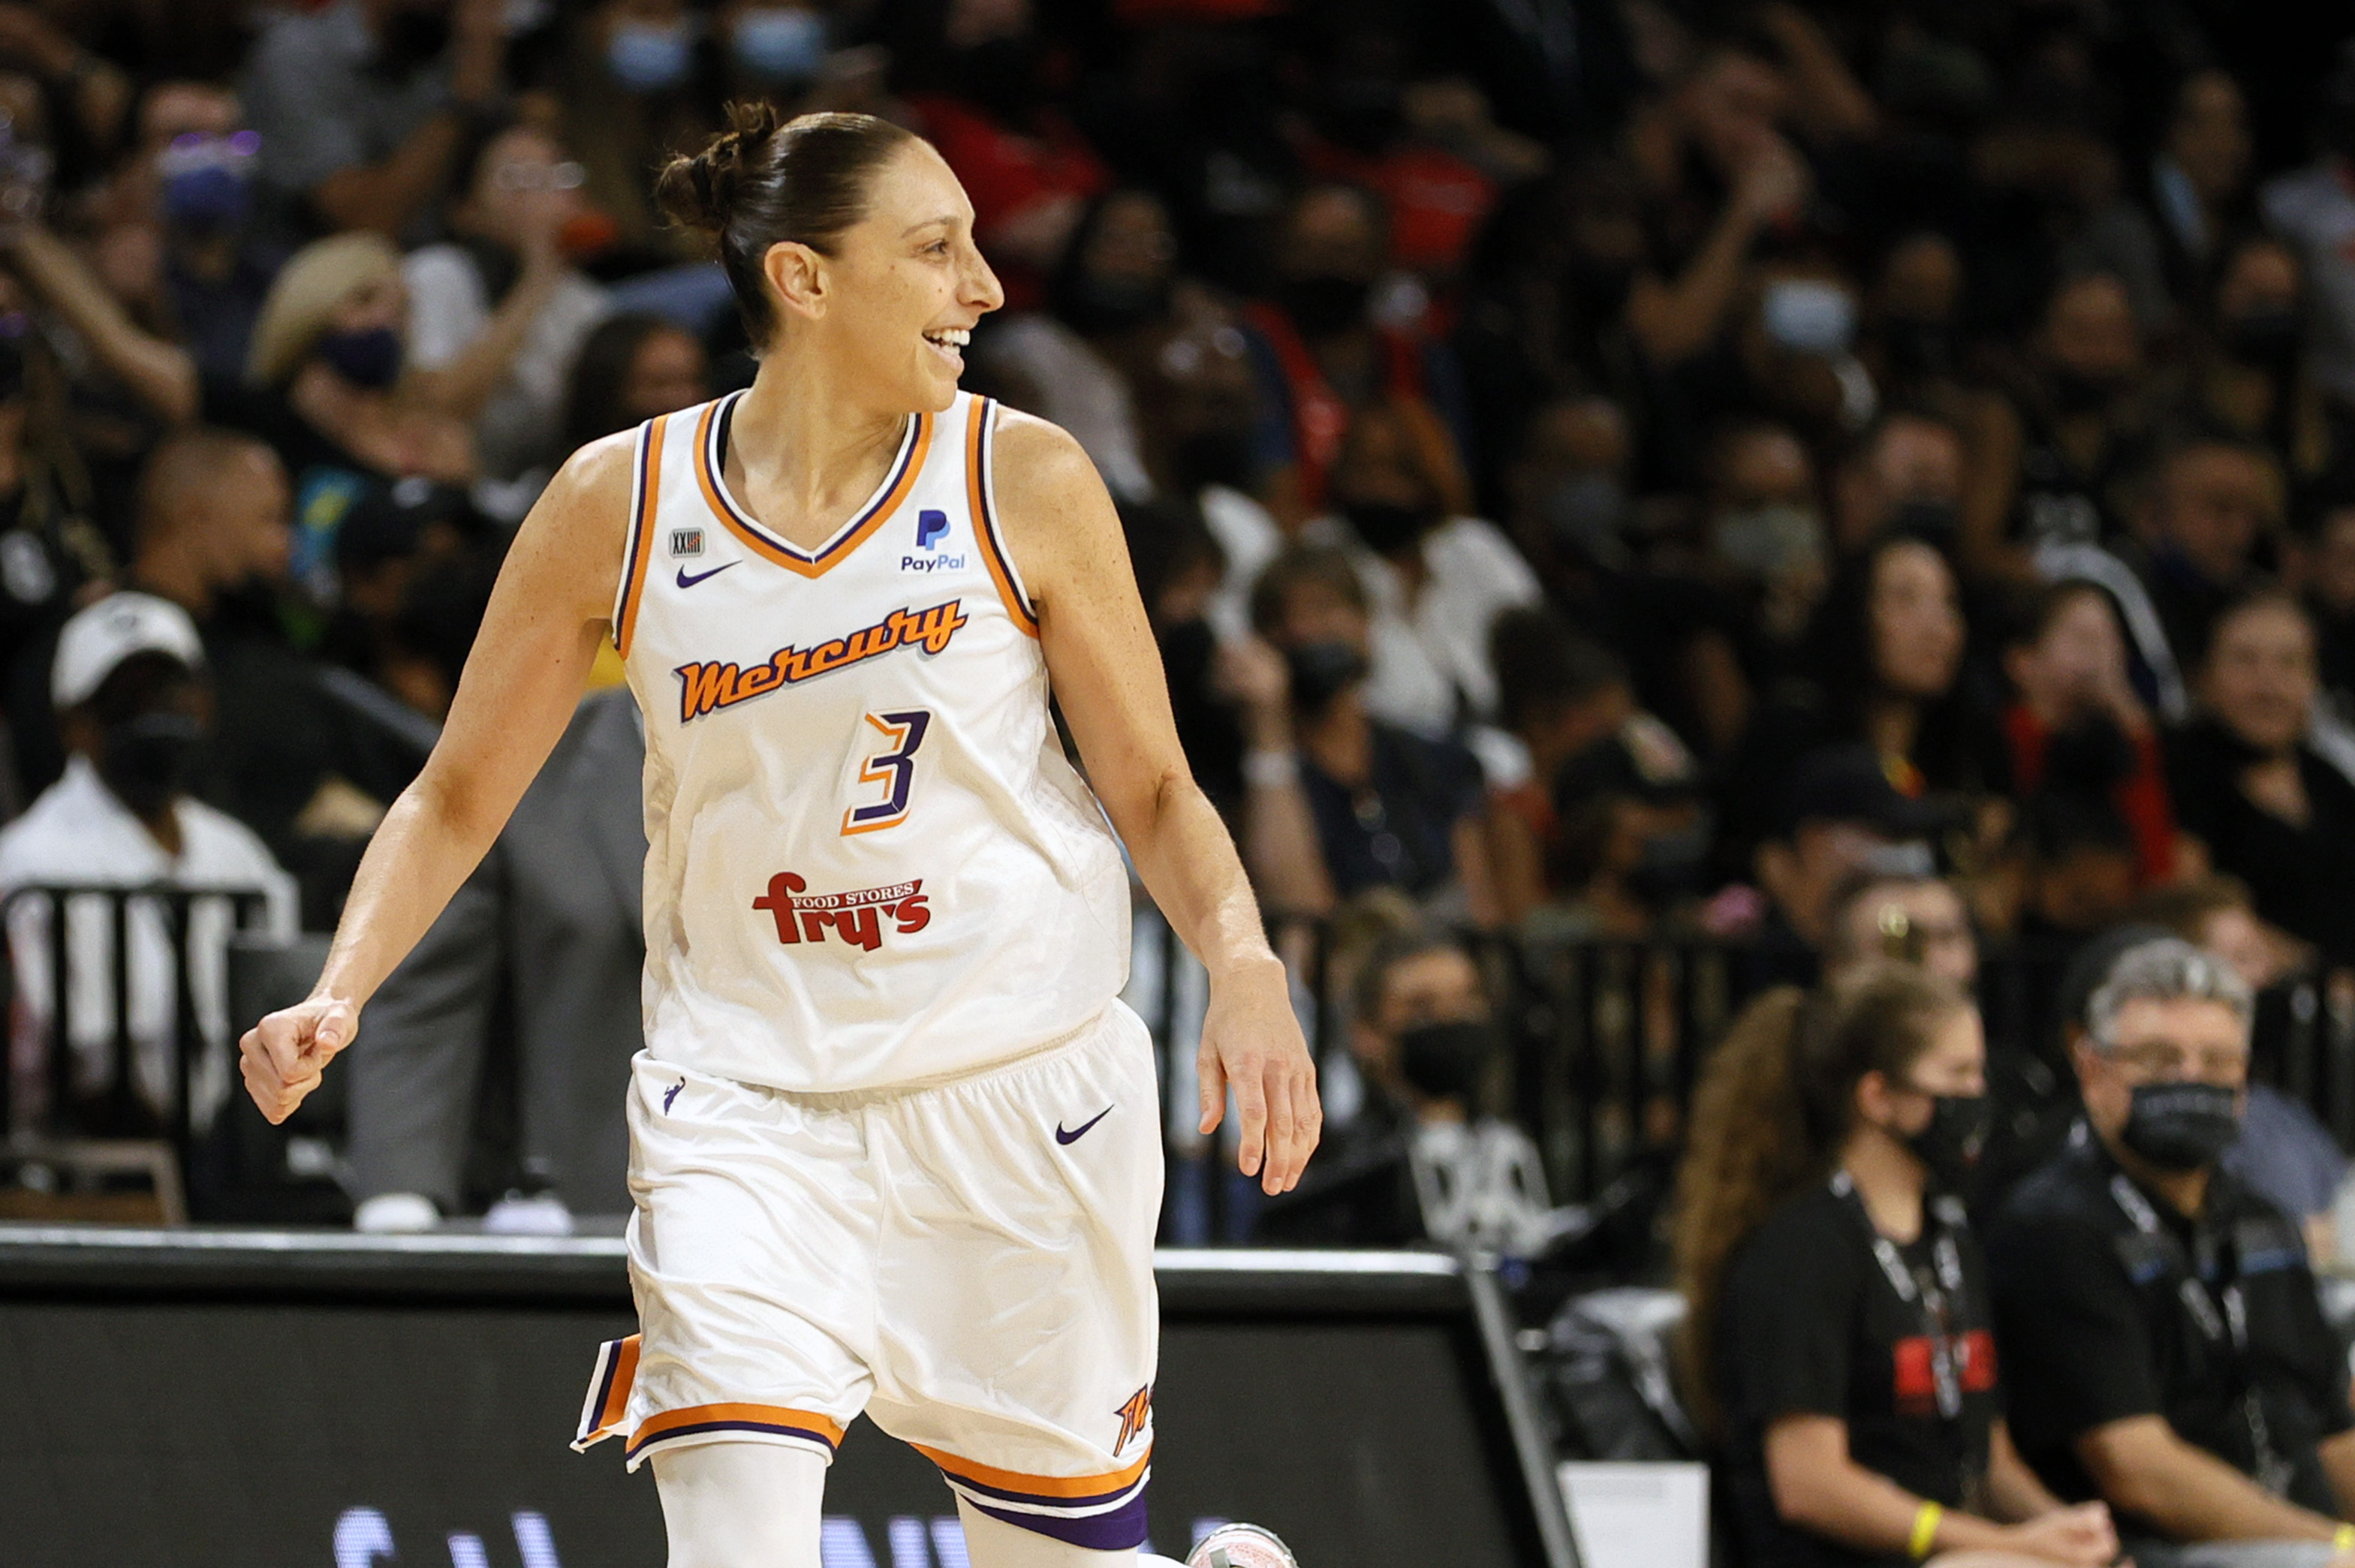 Diana Taurasi #3 of the Phoenix Mercury reacts after hitting a 3-pointer against the Las Vegas Aces during Game Two of the 2021 WNBA Playoffs semifinals at Michelob ULTRA Arena on September 30, 2021 in Las Vegas, Nevada. The Mercury defeated the Aces 117-91.